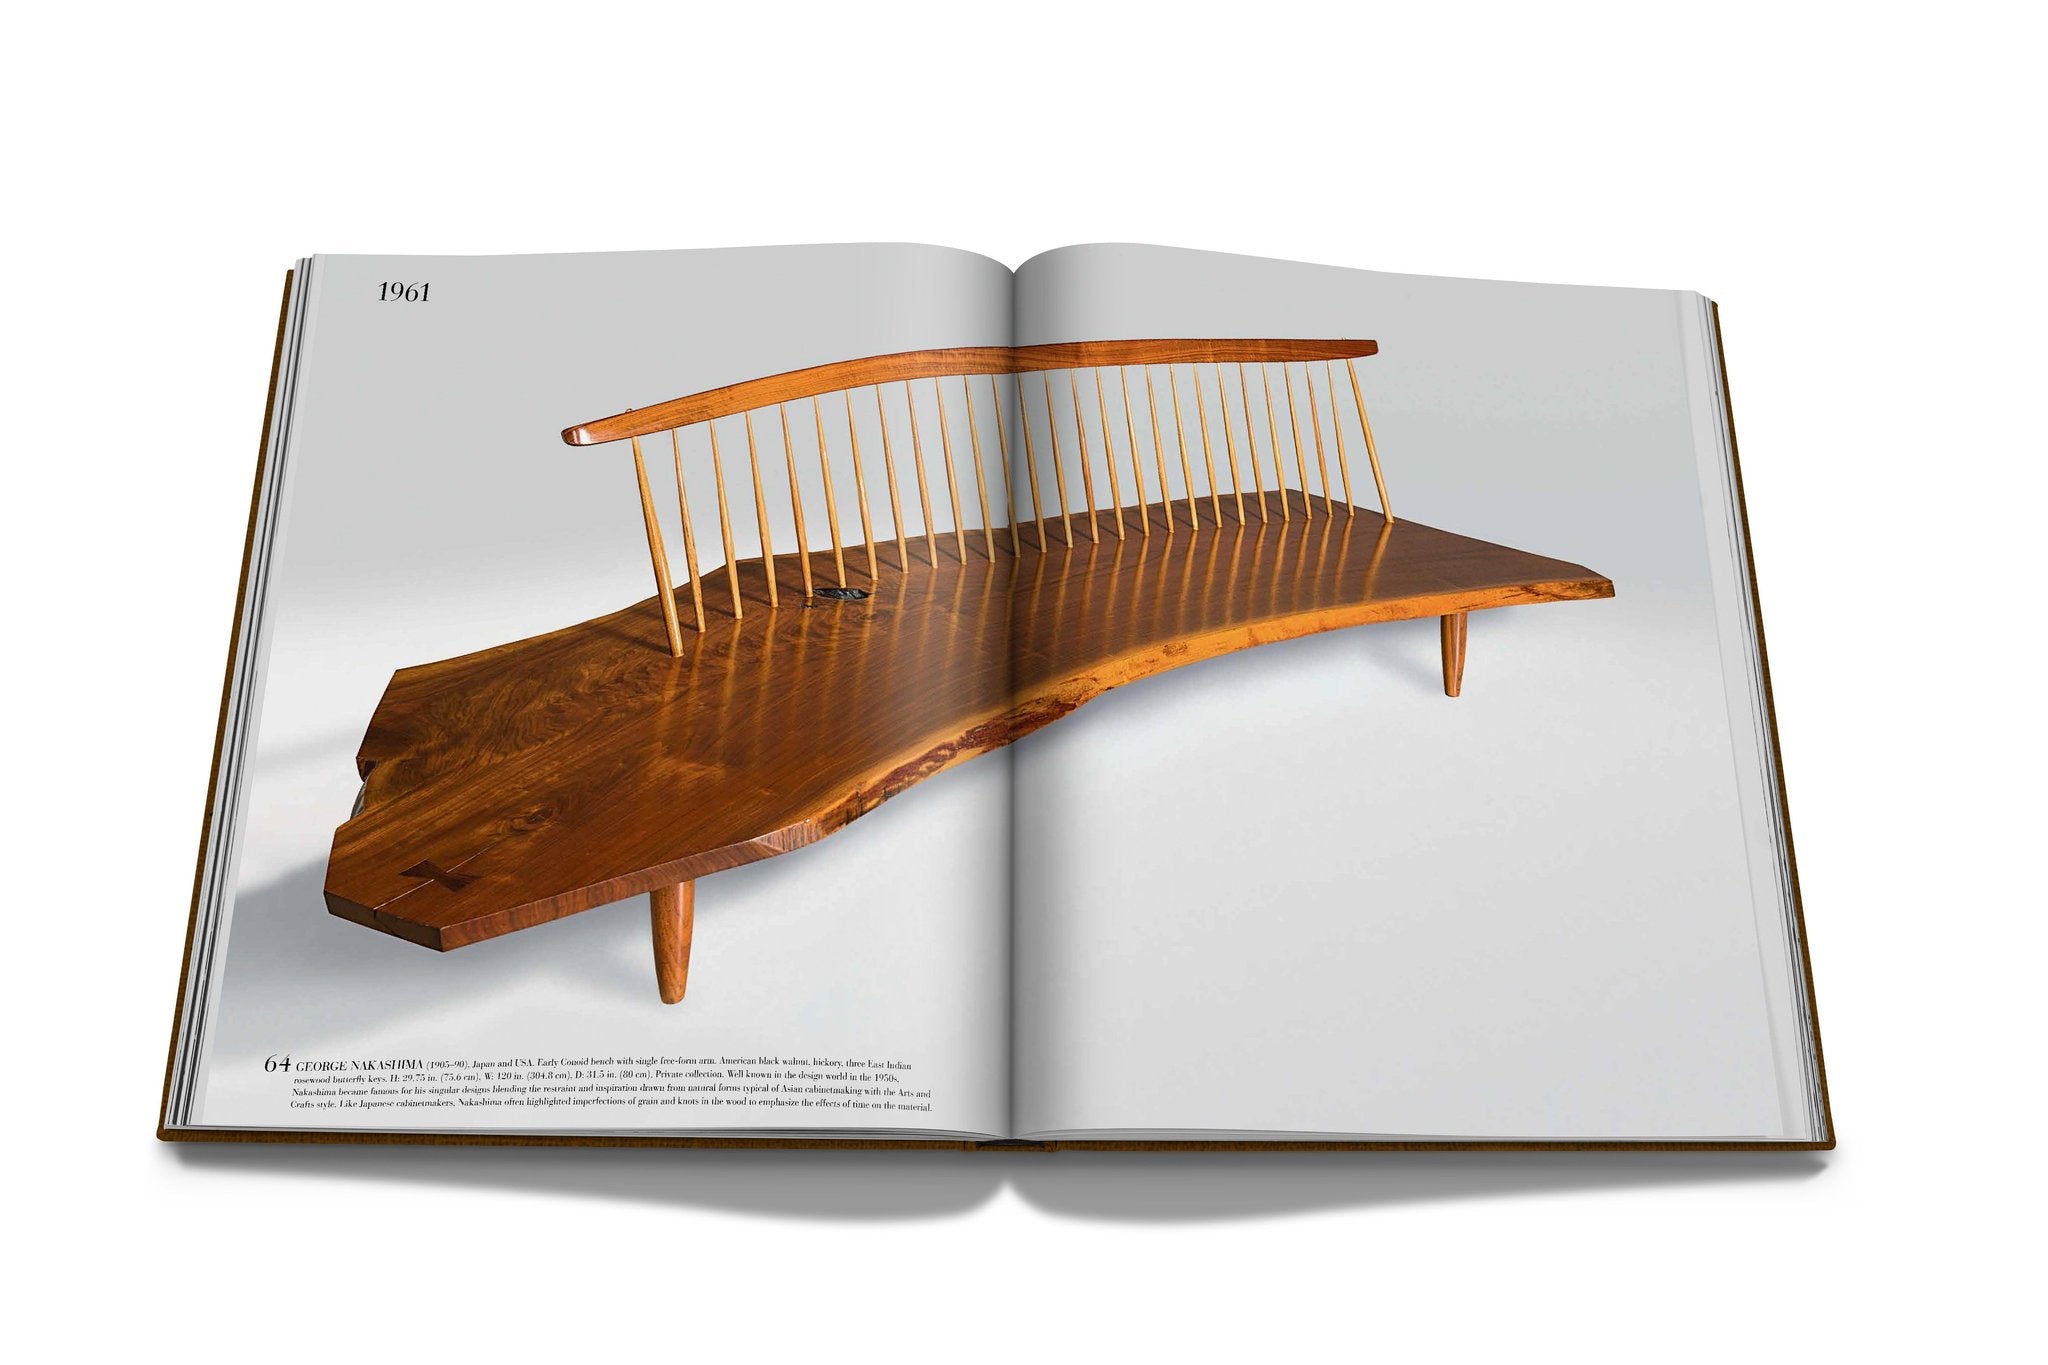 ASSOULINE The Impossible Collection of Design by Frédéric Chambre